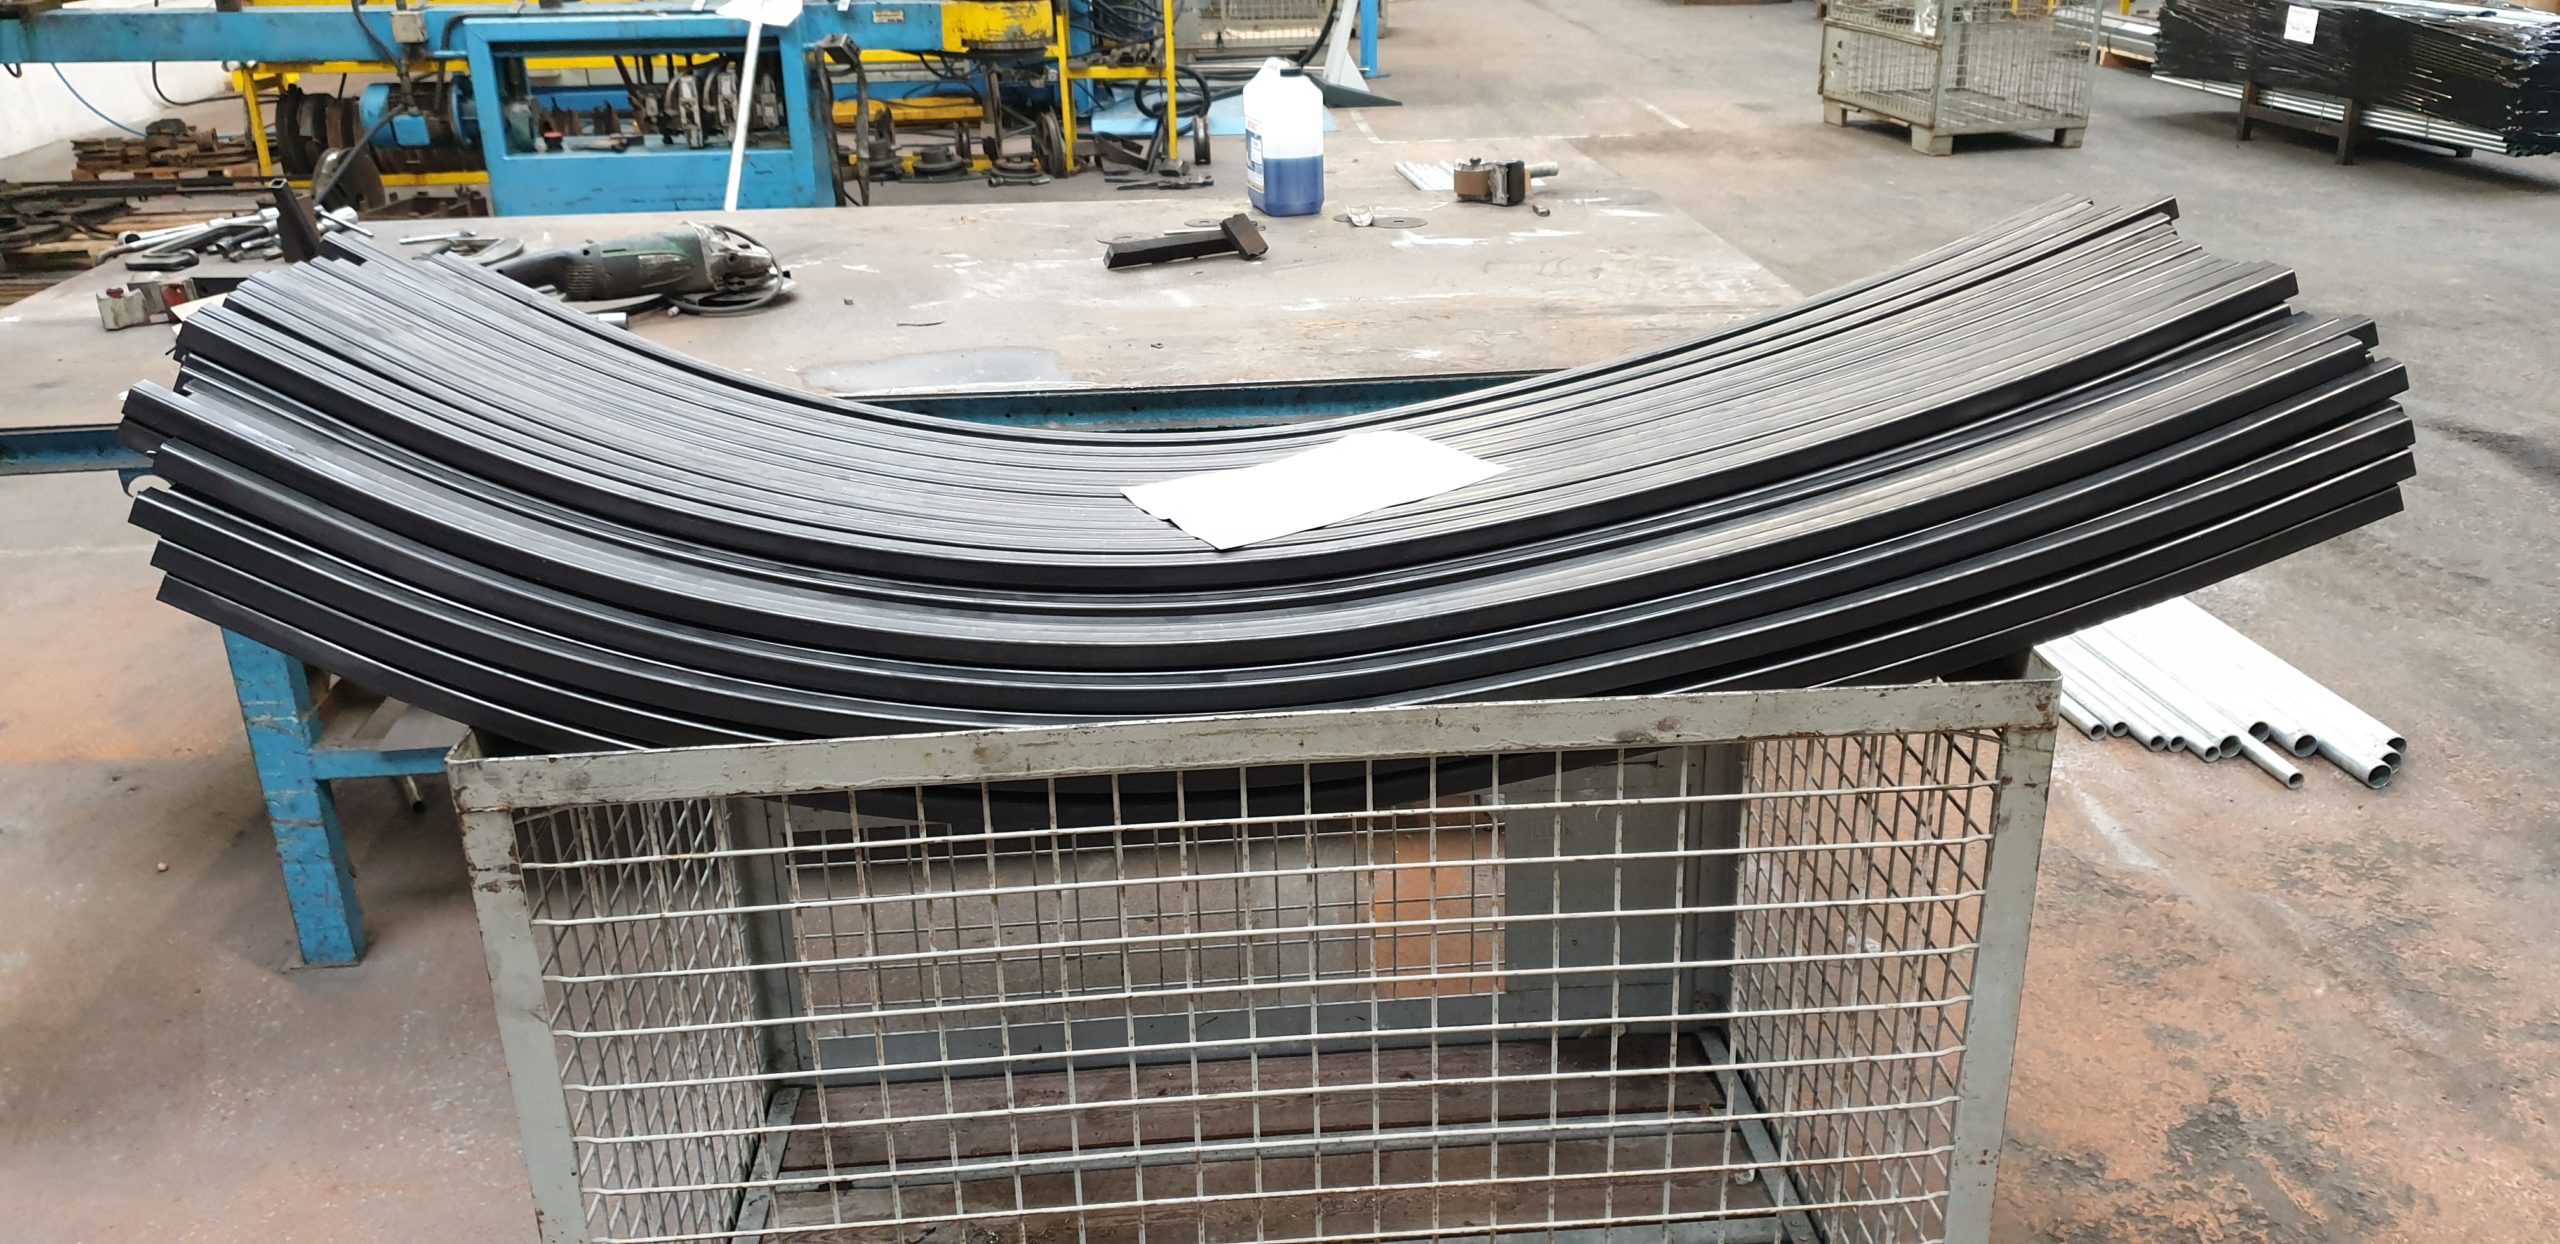 prototypes/small, medium and large series, capacity from 6 to 14 mm diameter, cold bending.